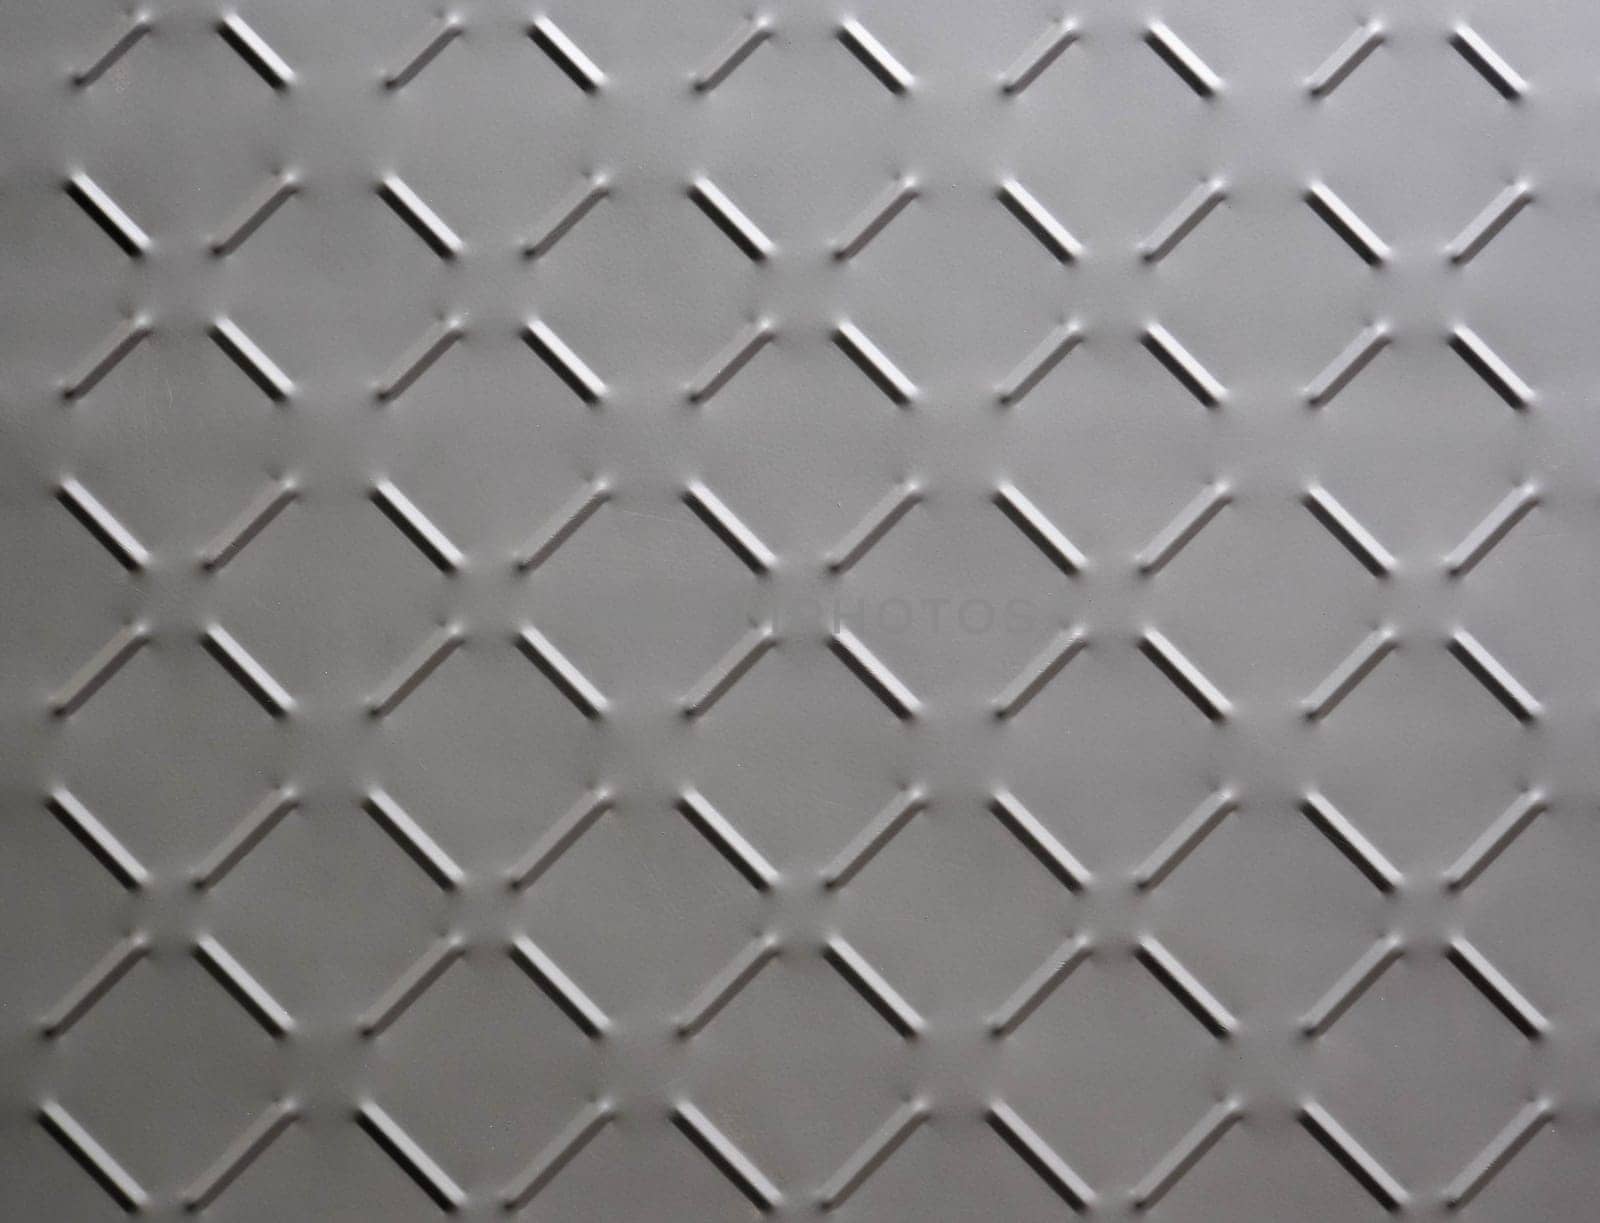 abstract background of old rusty metal plate with diamond pattern painted grey close up